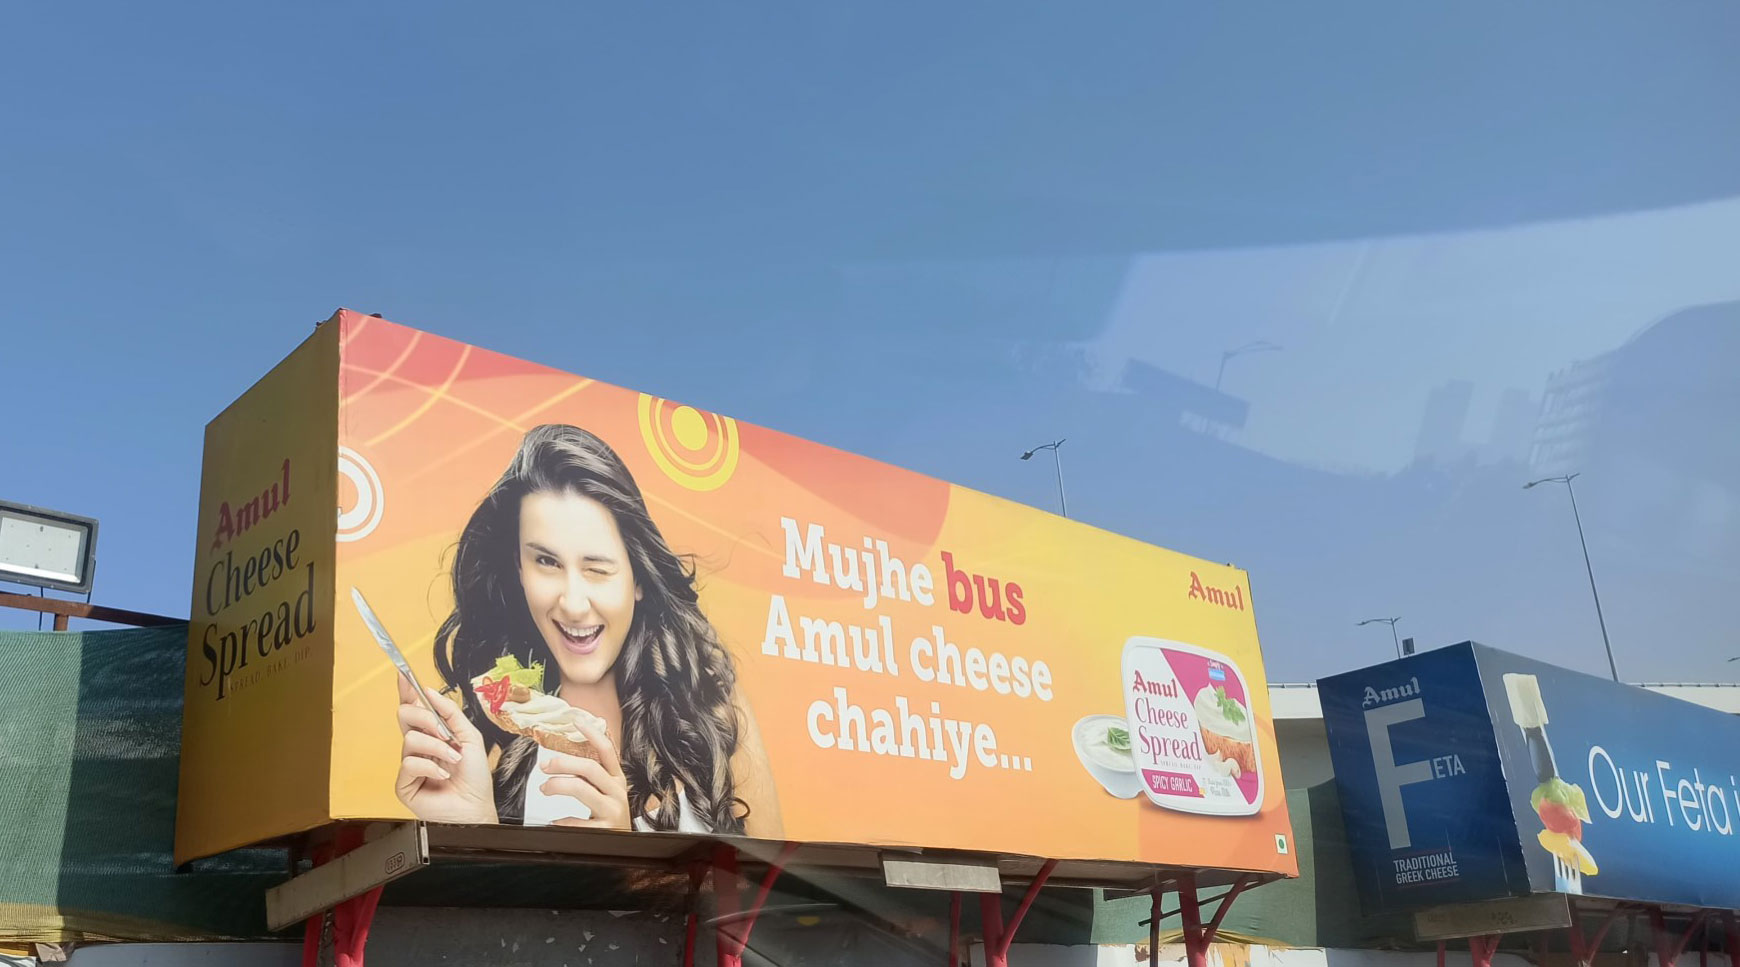 Amul takes over bus shelters in a prime location in Mumbai to showcase their range of cheese products.